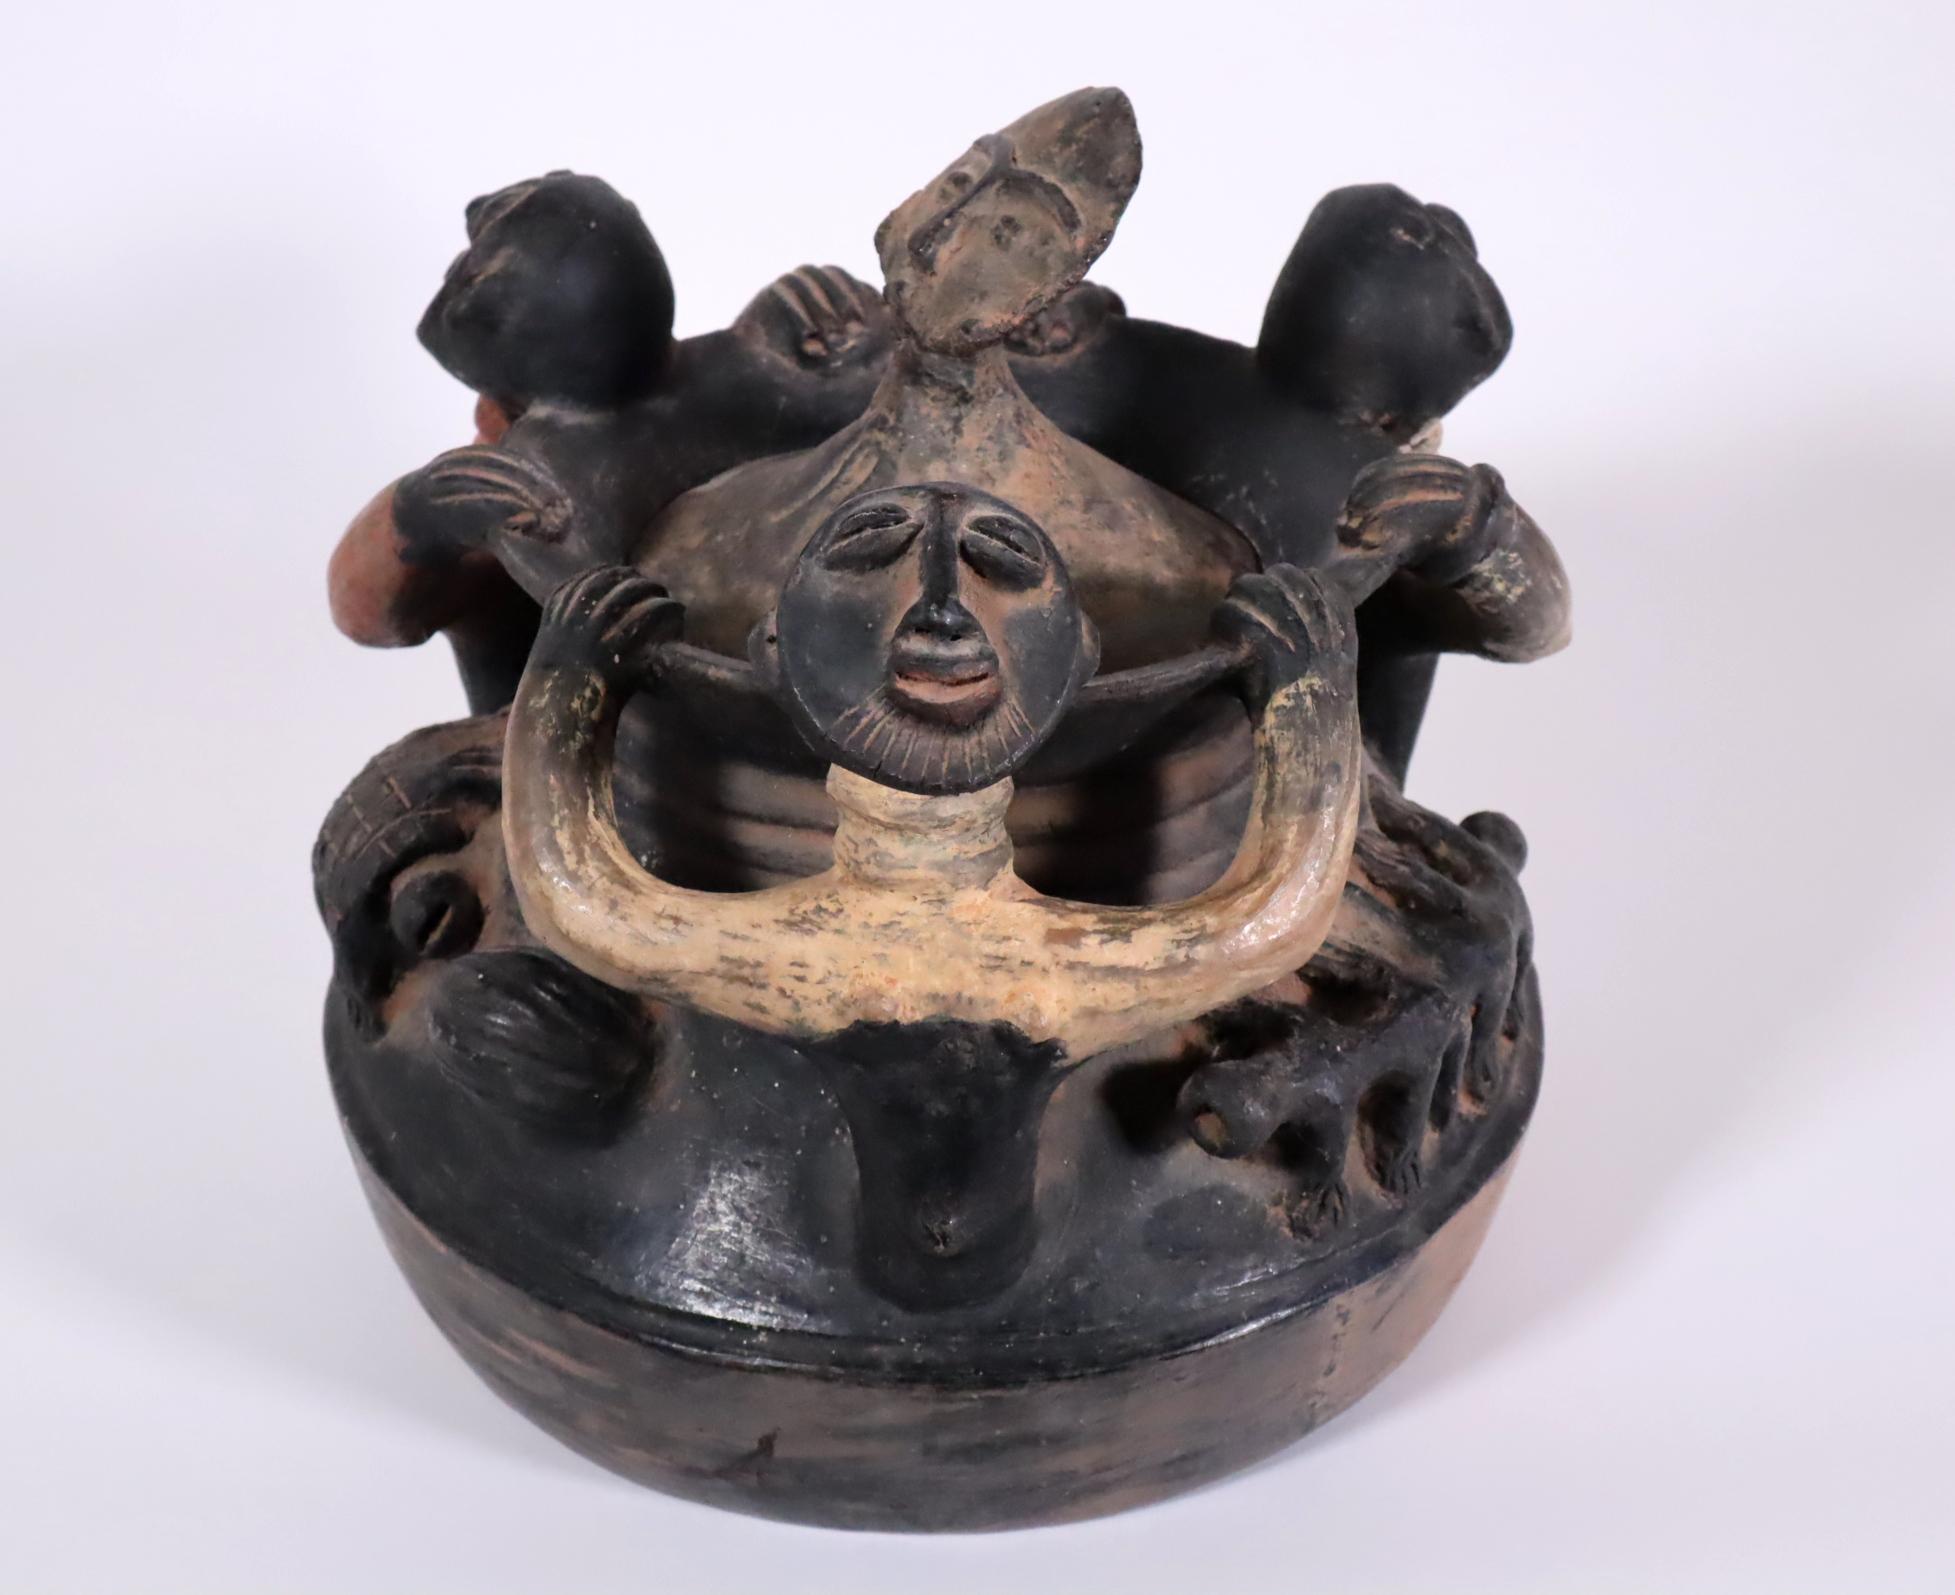 Store closing March 31. Last chance clearance sale.  A colorful and delightful large ceramic treasure vessel from the Akan people of Ghana. Earthenware with black, orange, red, and cream colored paint, early 20th century.
Rising from the shoulder of